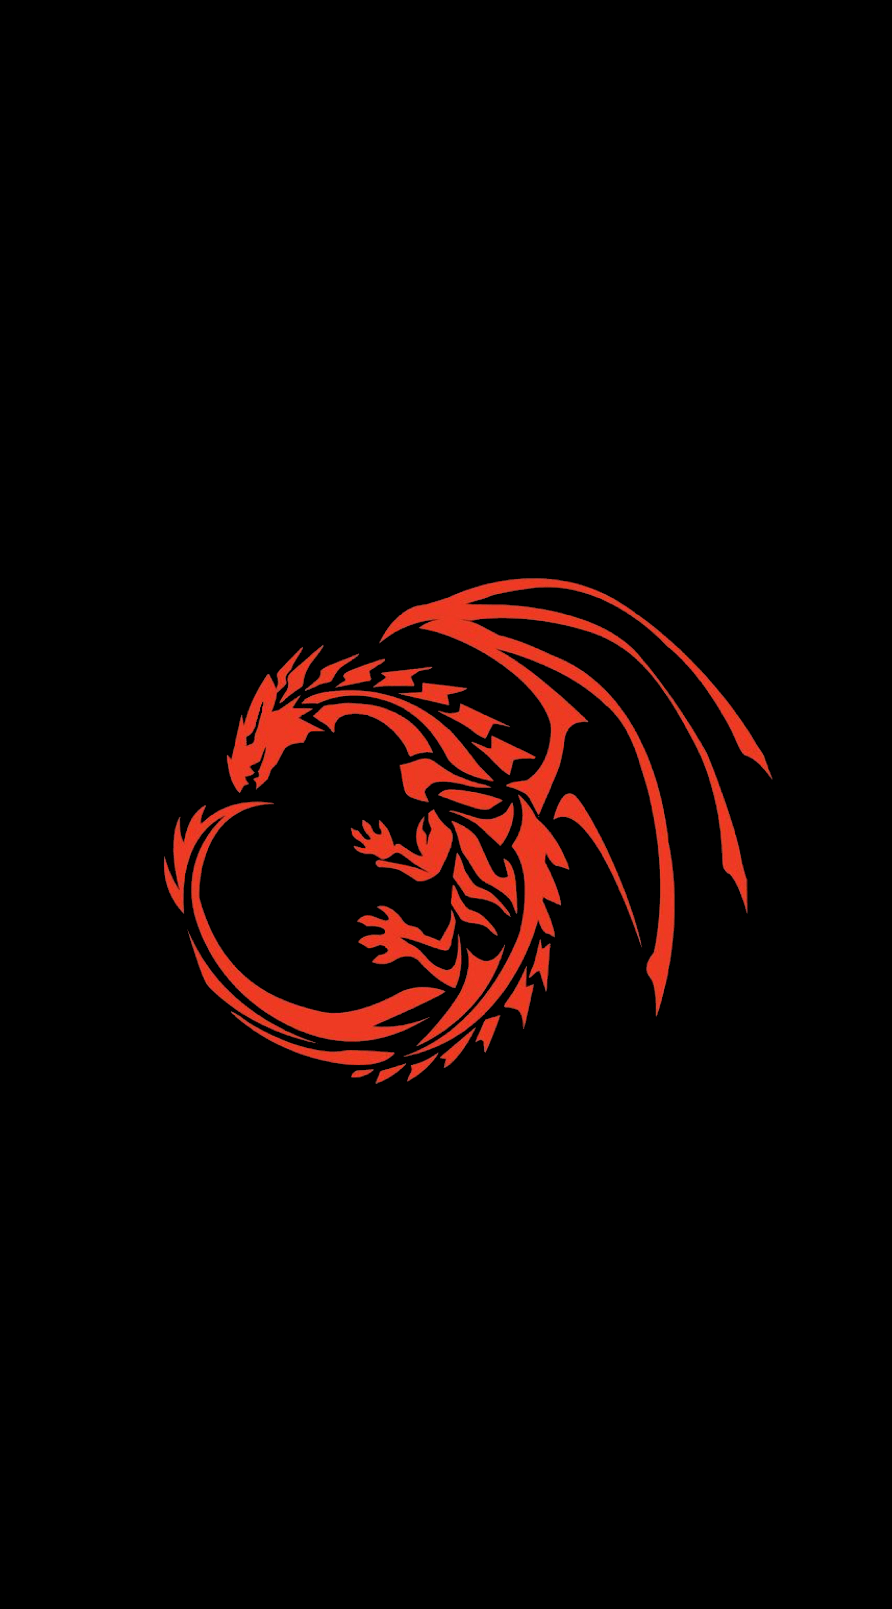 Game Of Thrones Minimalist Wallpapers Top Free Game Of